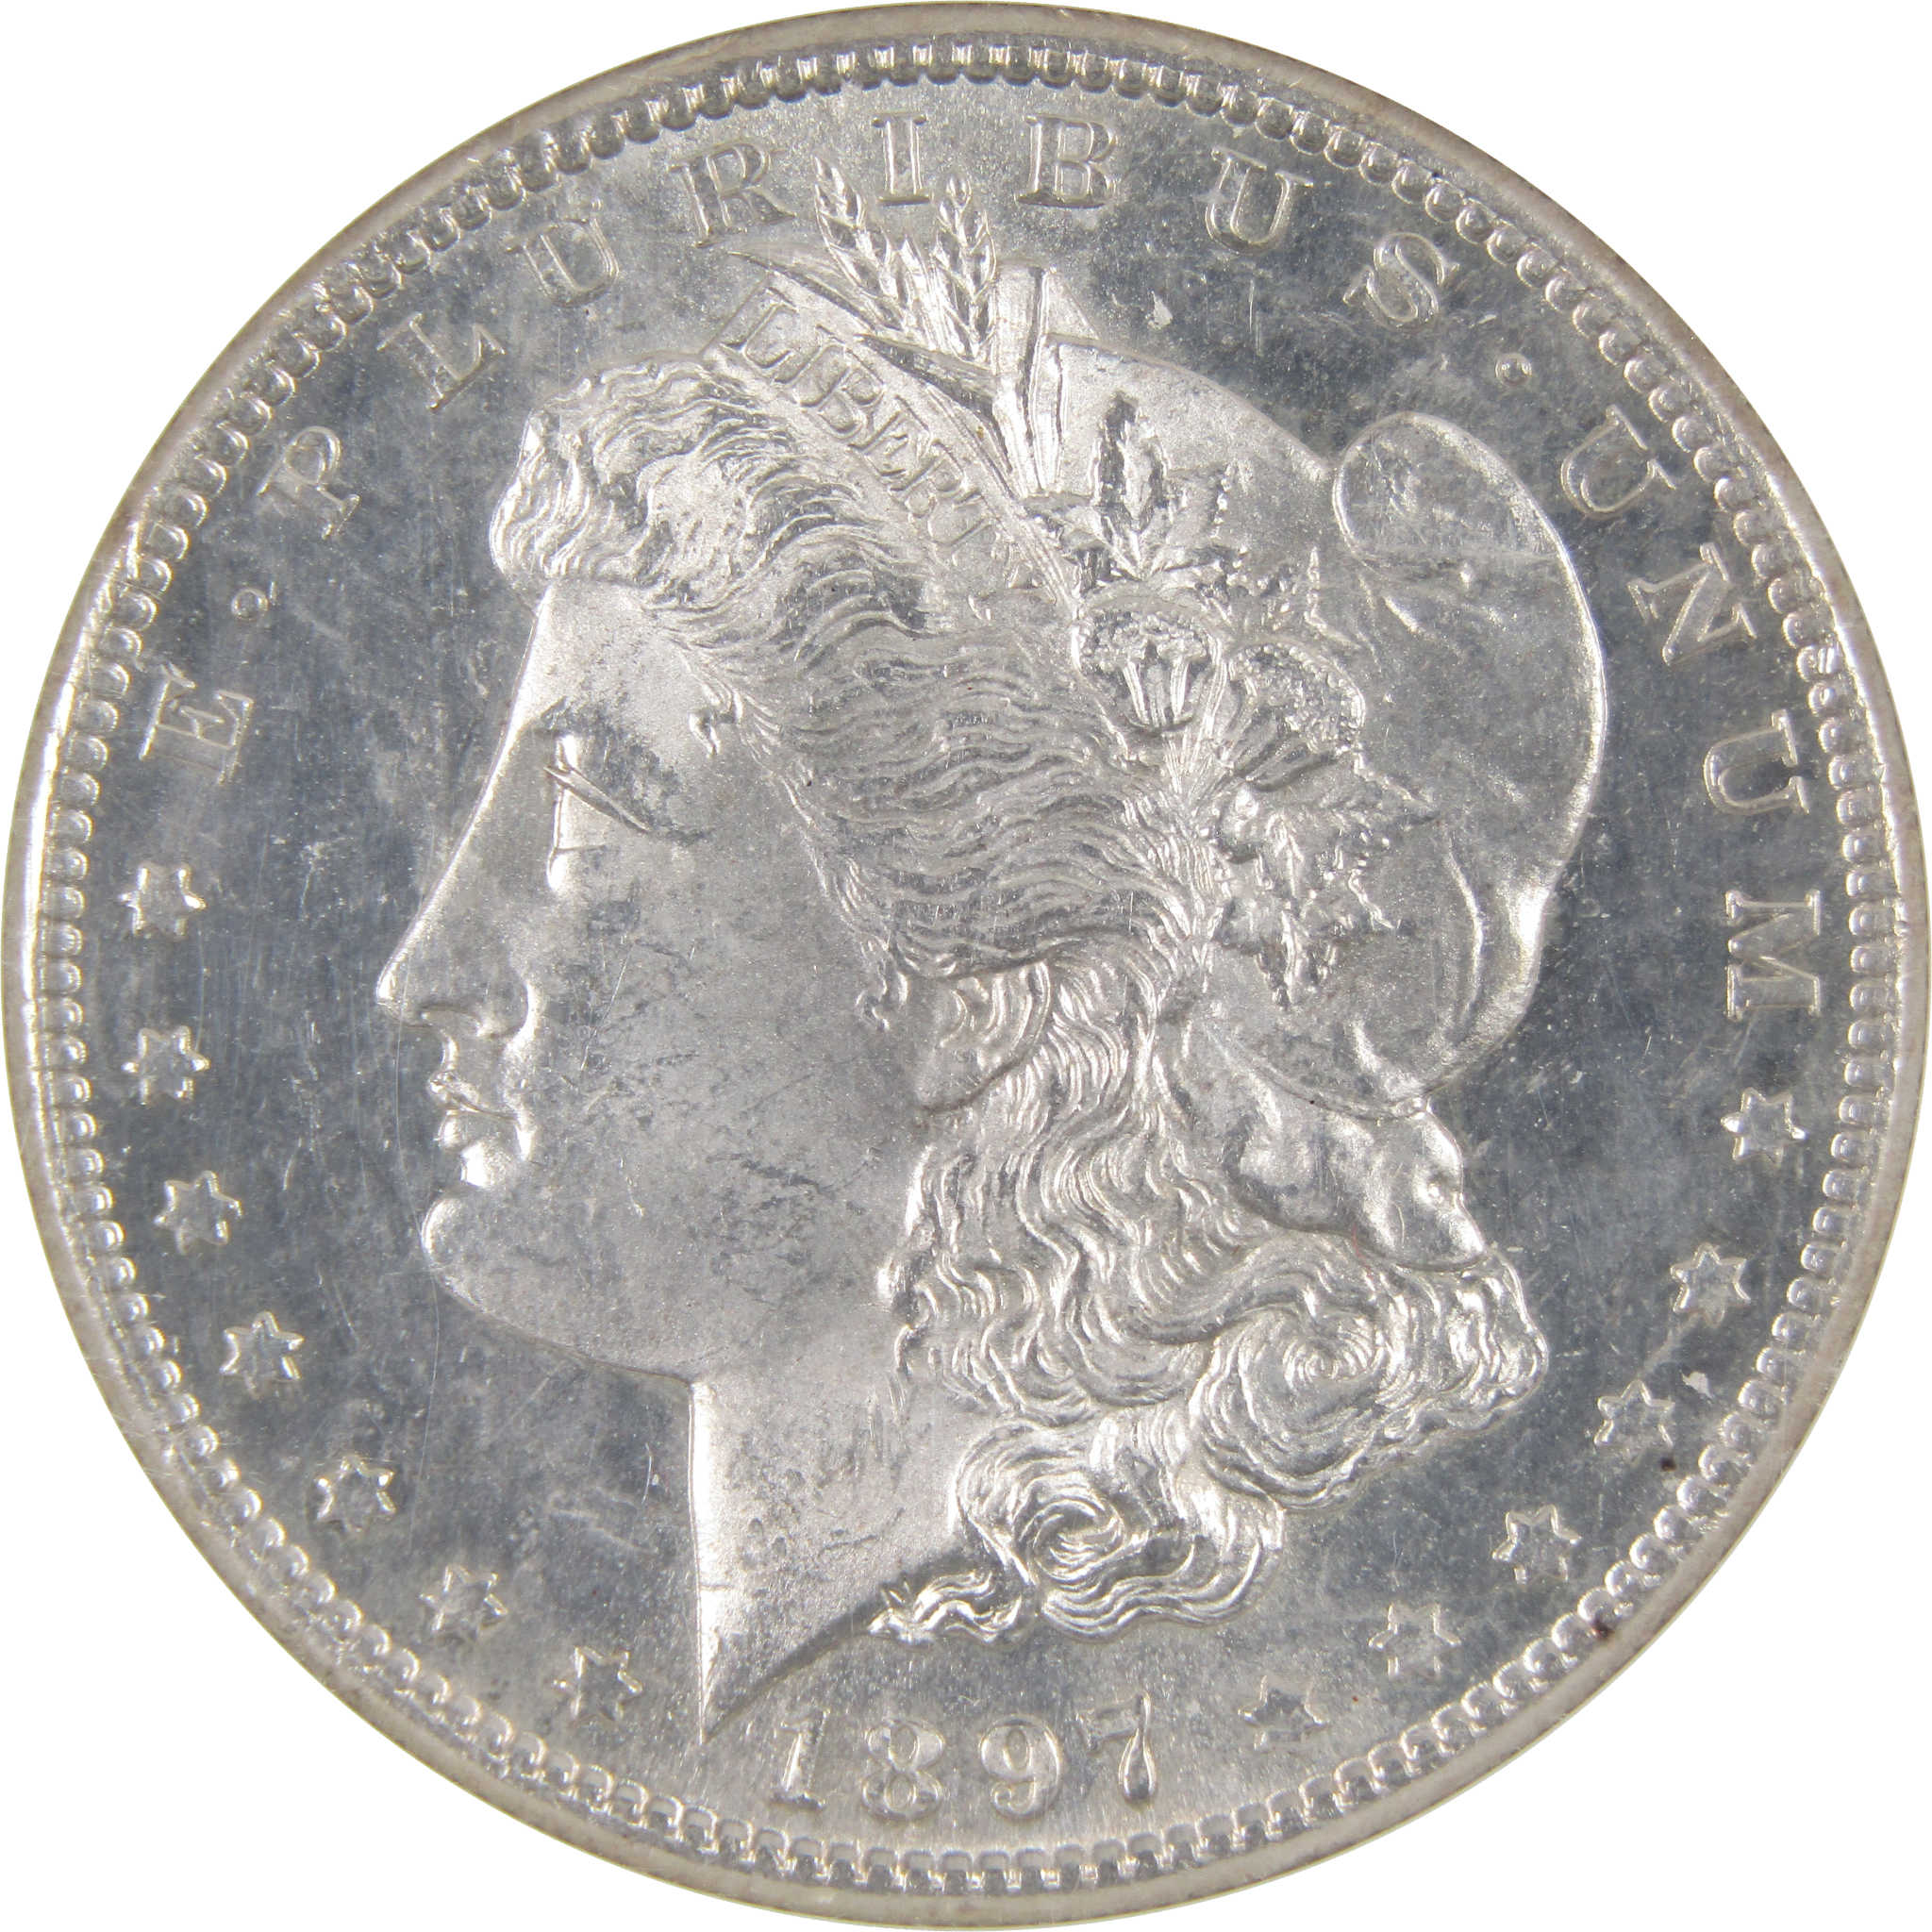 1897 S Morgan Dollar MS 64 NGC 90% Silver Uncirculated SKU:I2914 - Morgan coin - Morgan silver dollar - Morgan silver dollar for sale - Profile Coins &amp; Collectibles